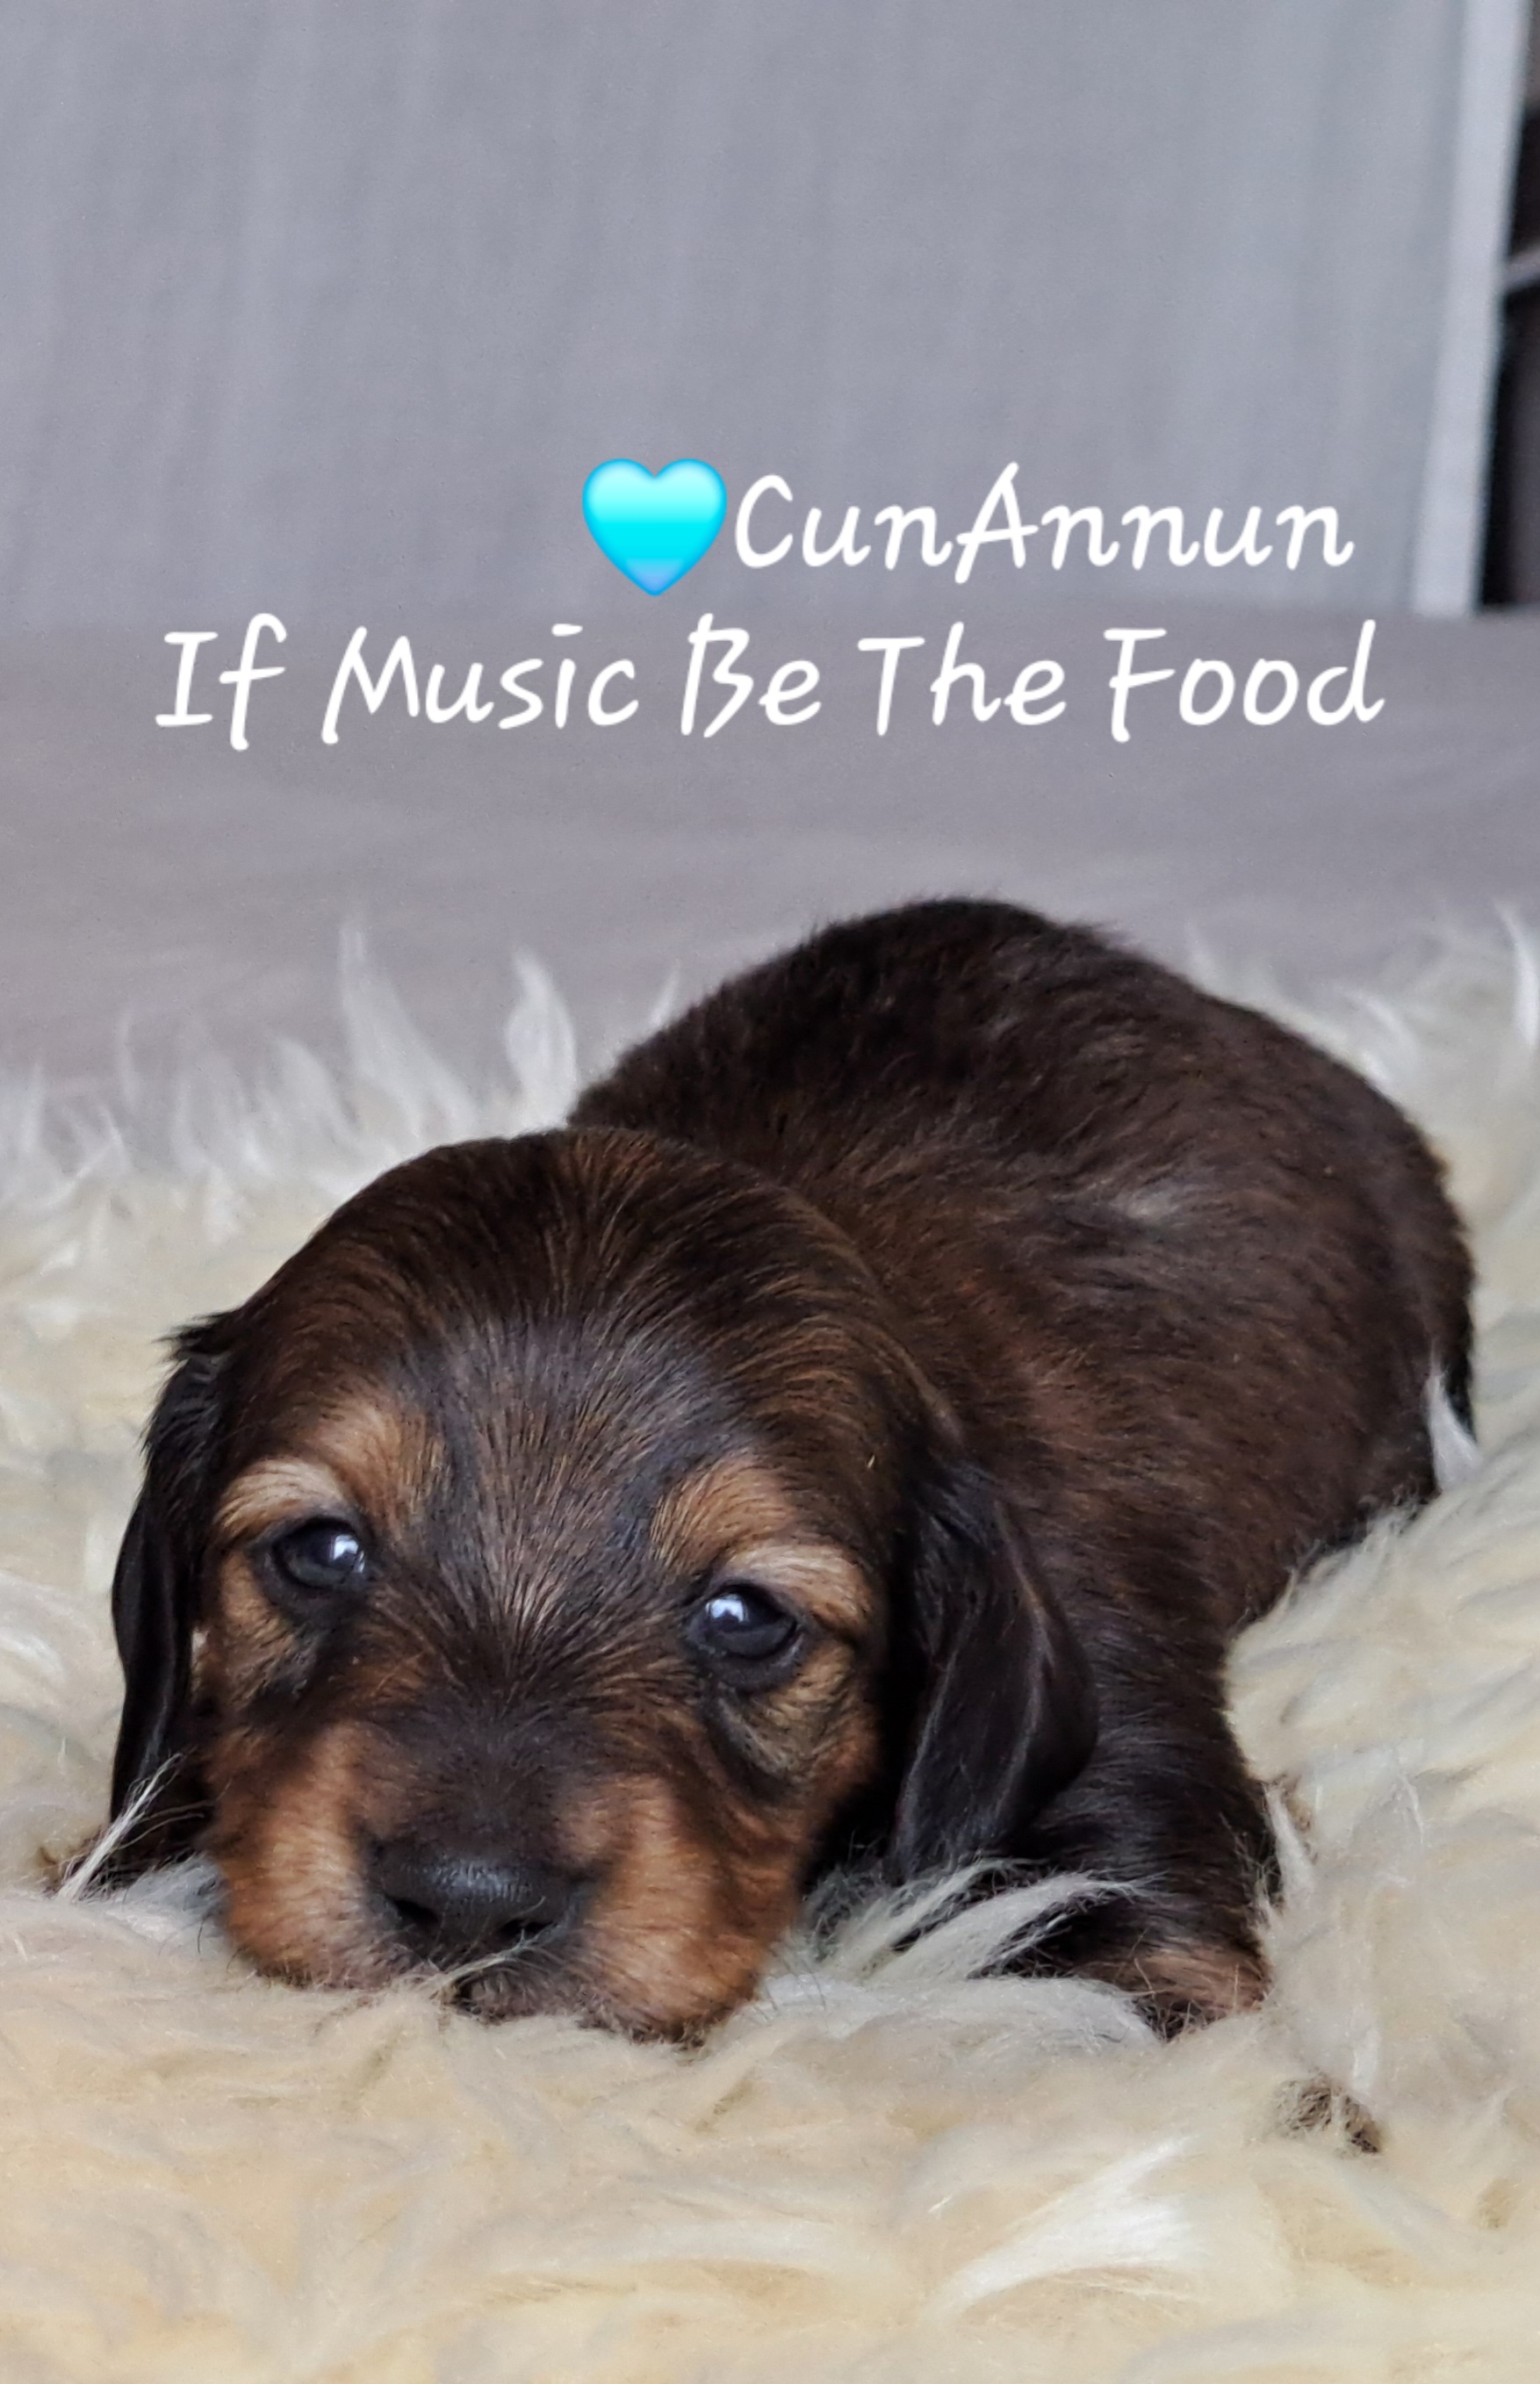 CUNANNUN IF MUSIC BE THE FOOD